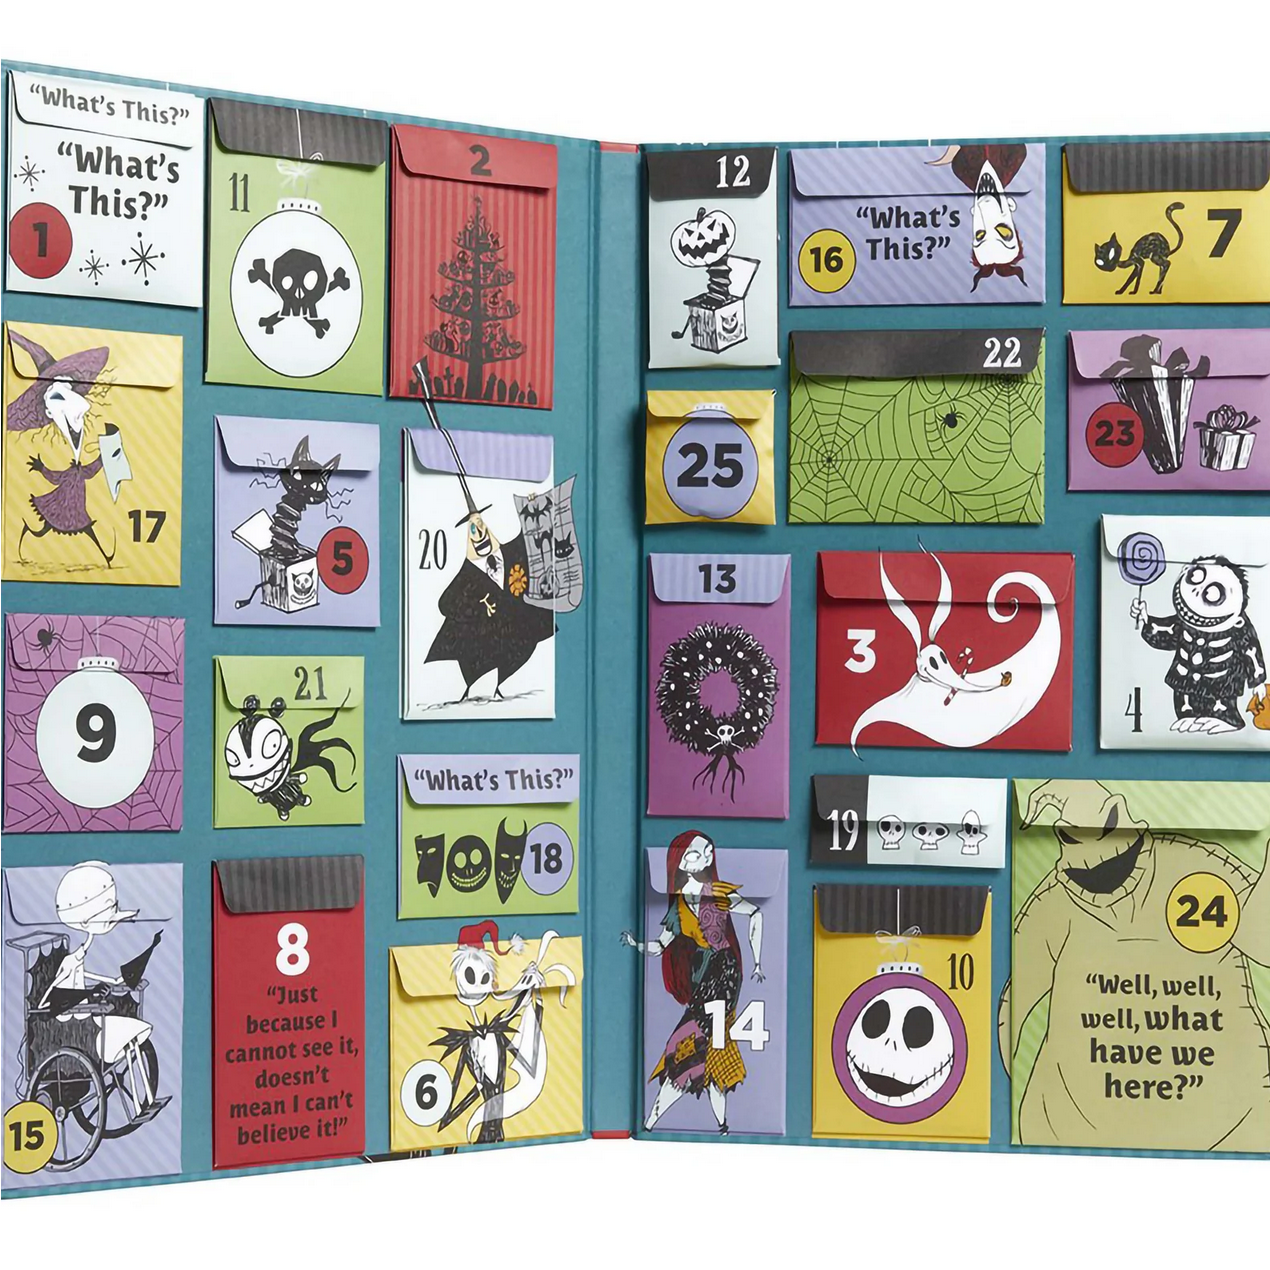 
The Nightmare Before Christmas: Official Advent Calendar of Ghoulish Delights

$19.99 